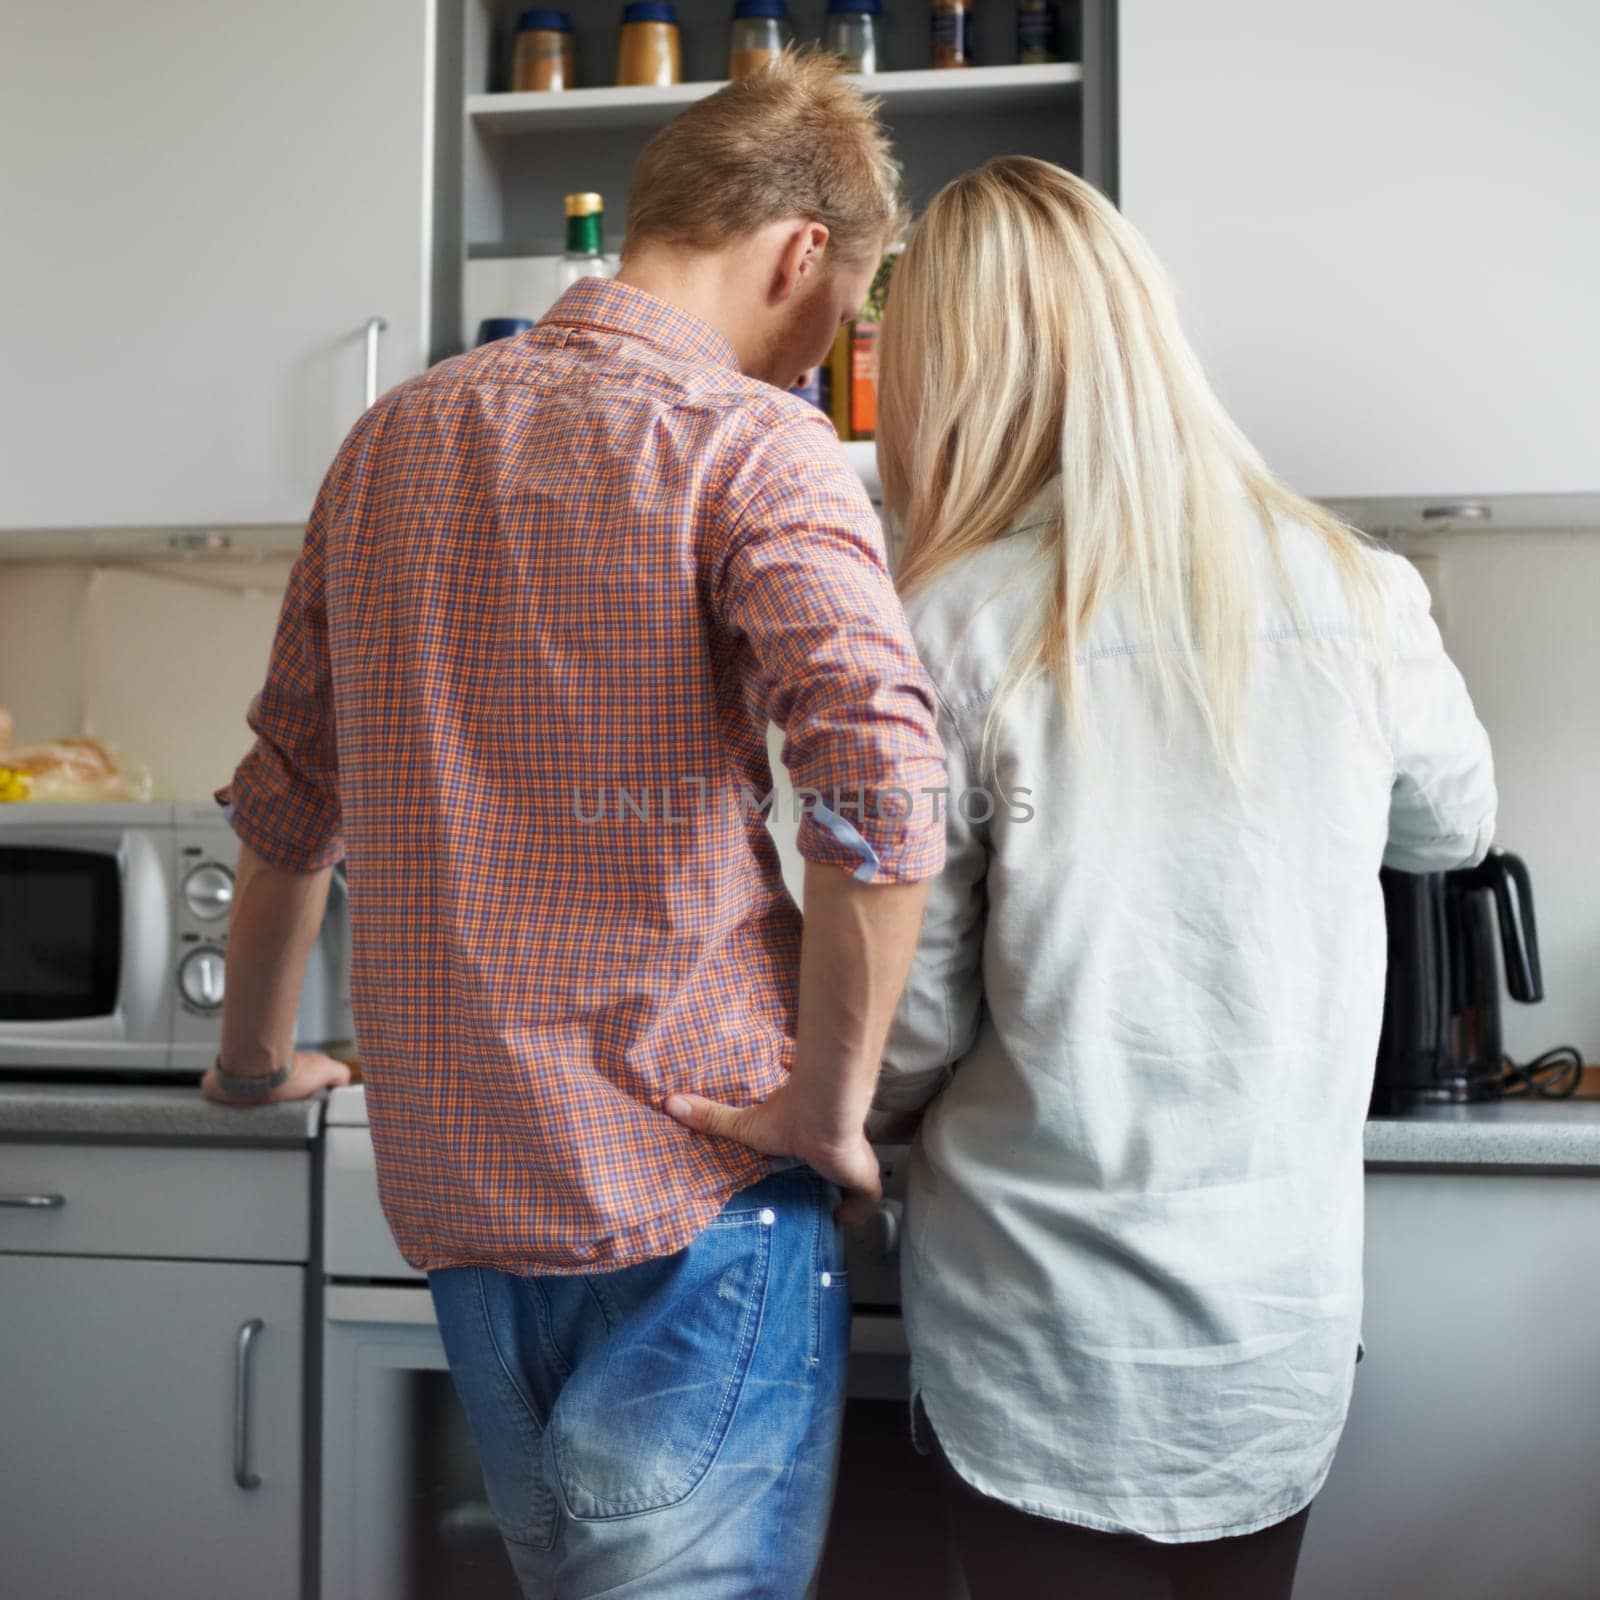 Cooking, back and couple in a kitchen for breakfast, meal or bonding at home together. Love, food and rear view of people in a house for meal prep, brunch or preparing dinner on weekend or day off.